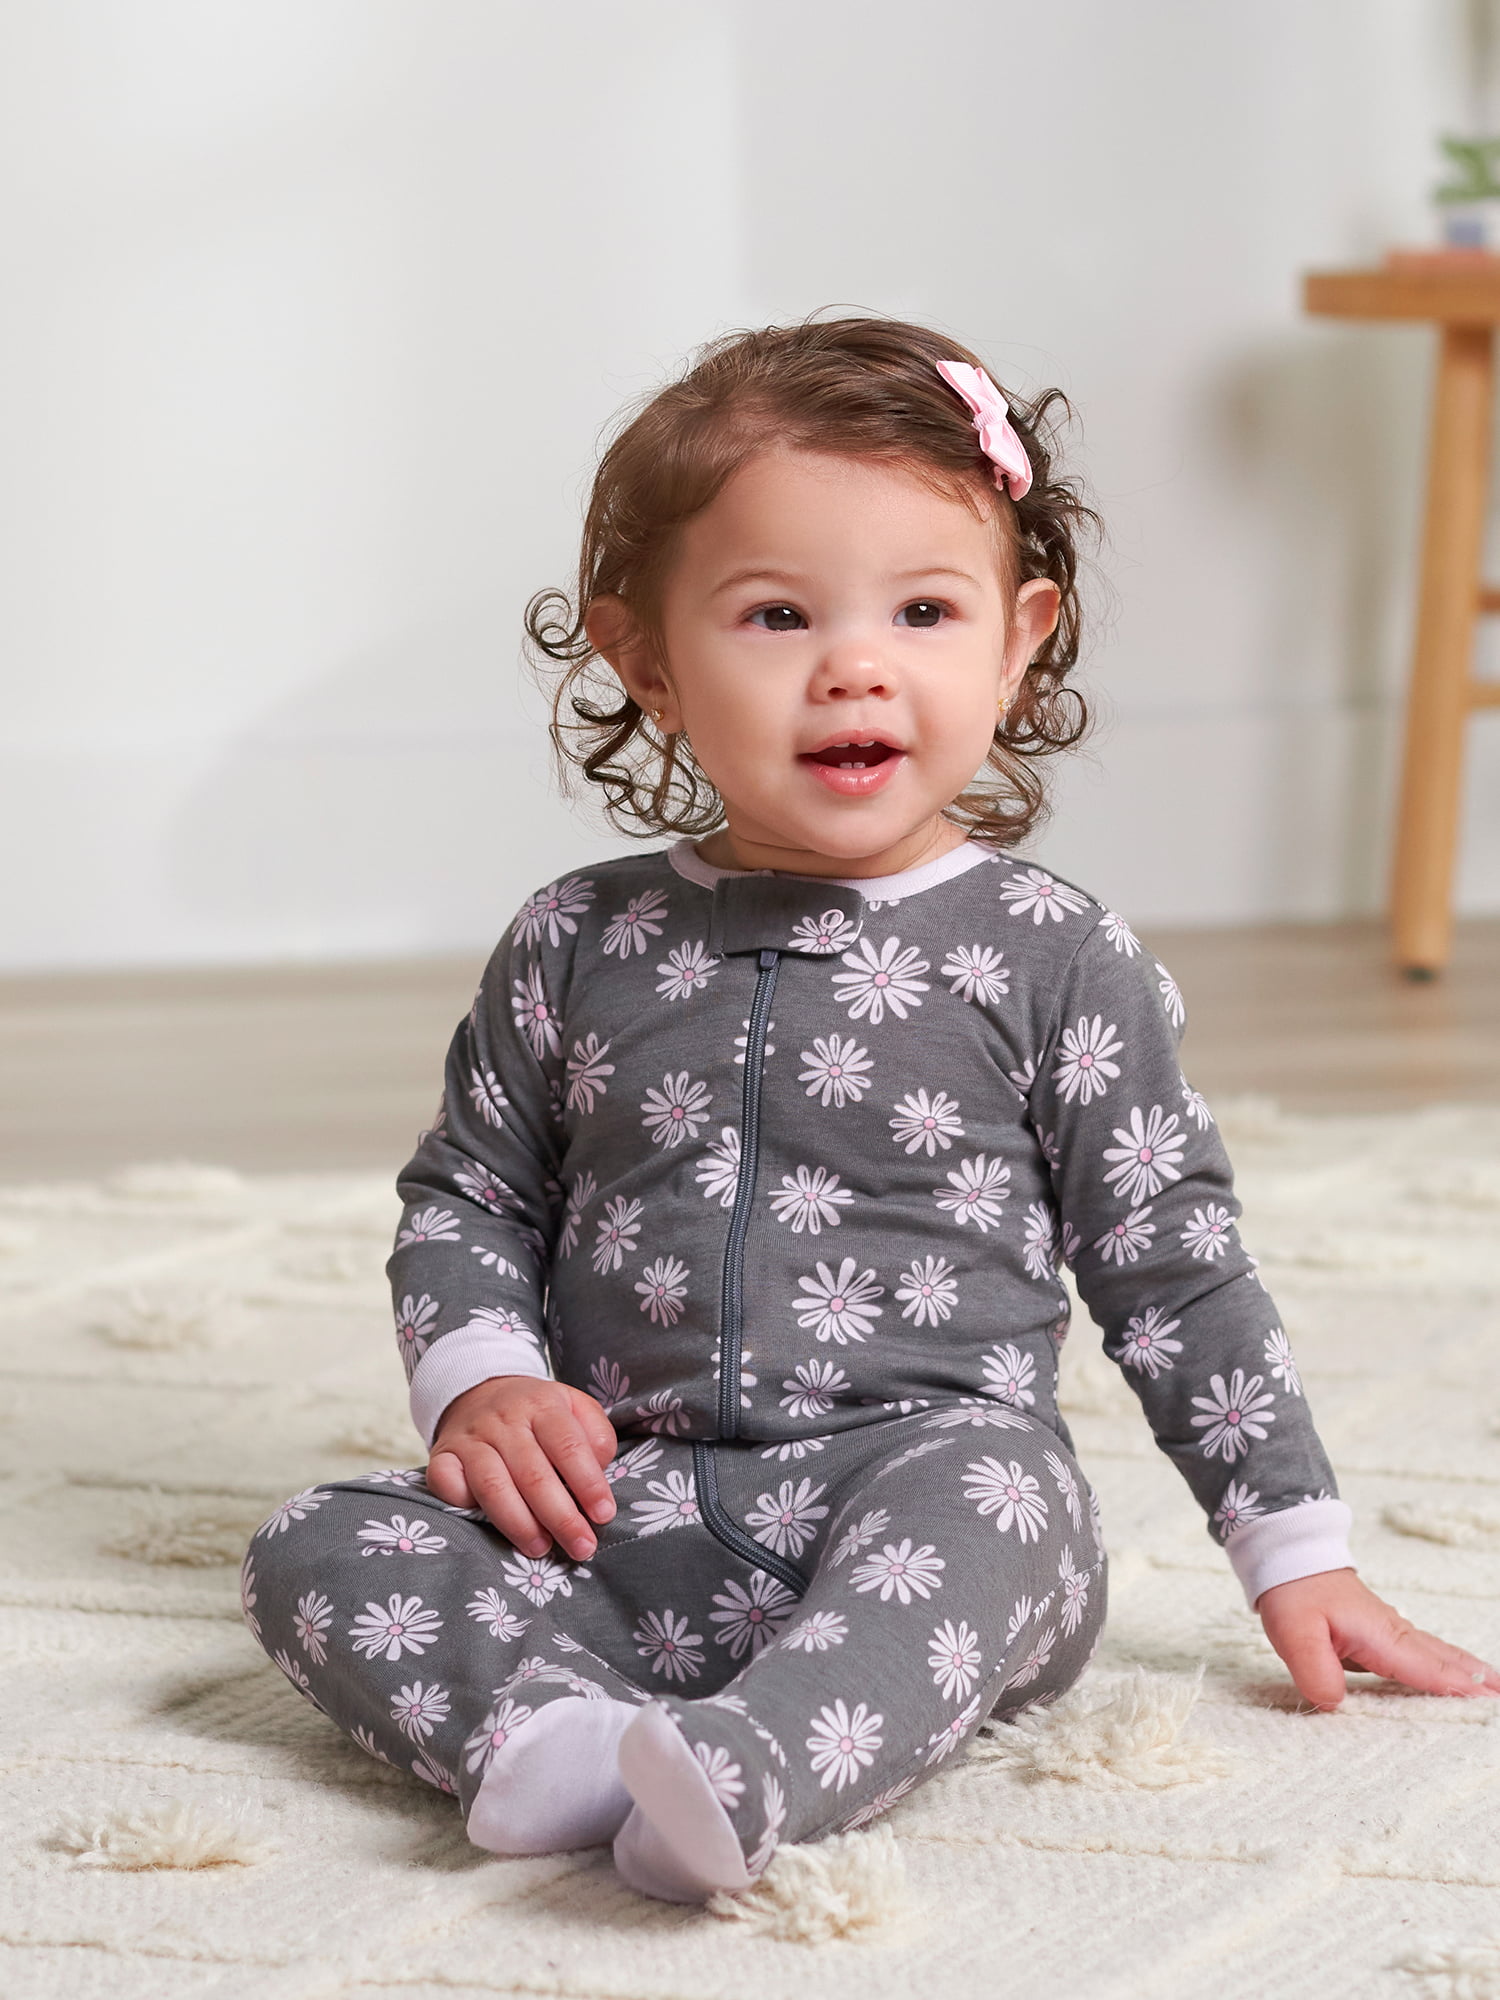 Essentials for Combination Feeding — Girl in the Pjs